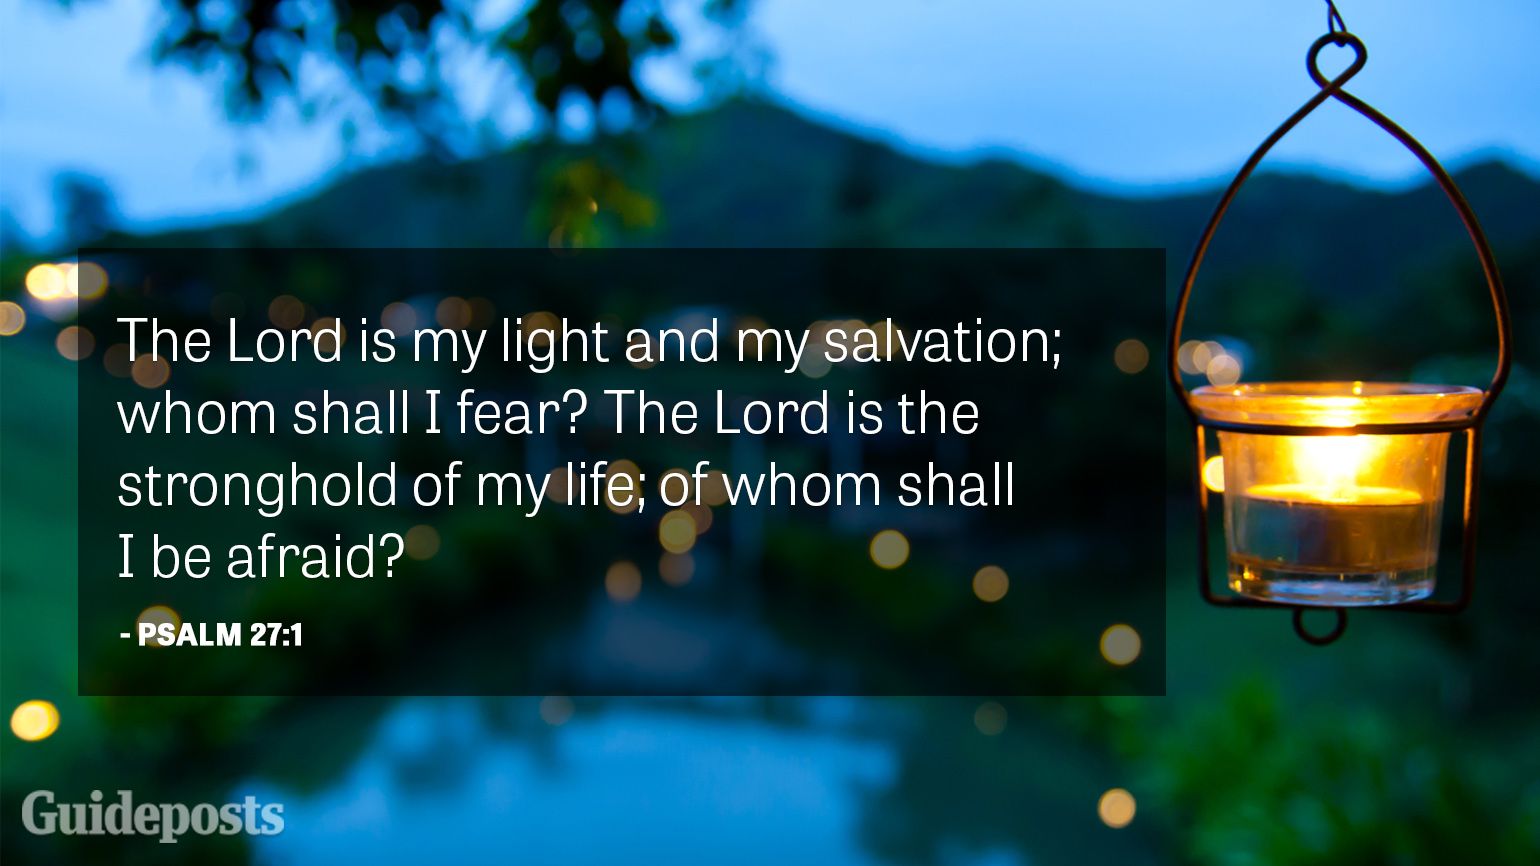 The Lord is my light and my salvation; whom shall I fear? The Lord is the stronghold of my life; of whom shall I be afraid?